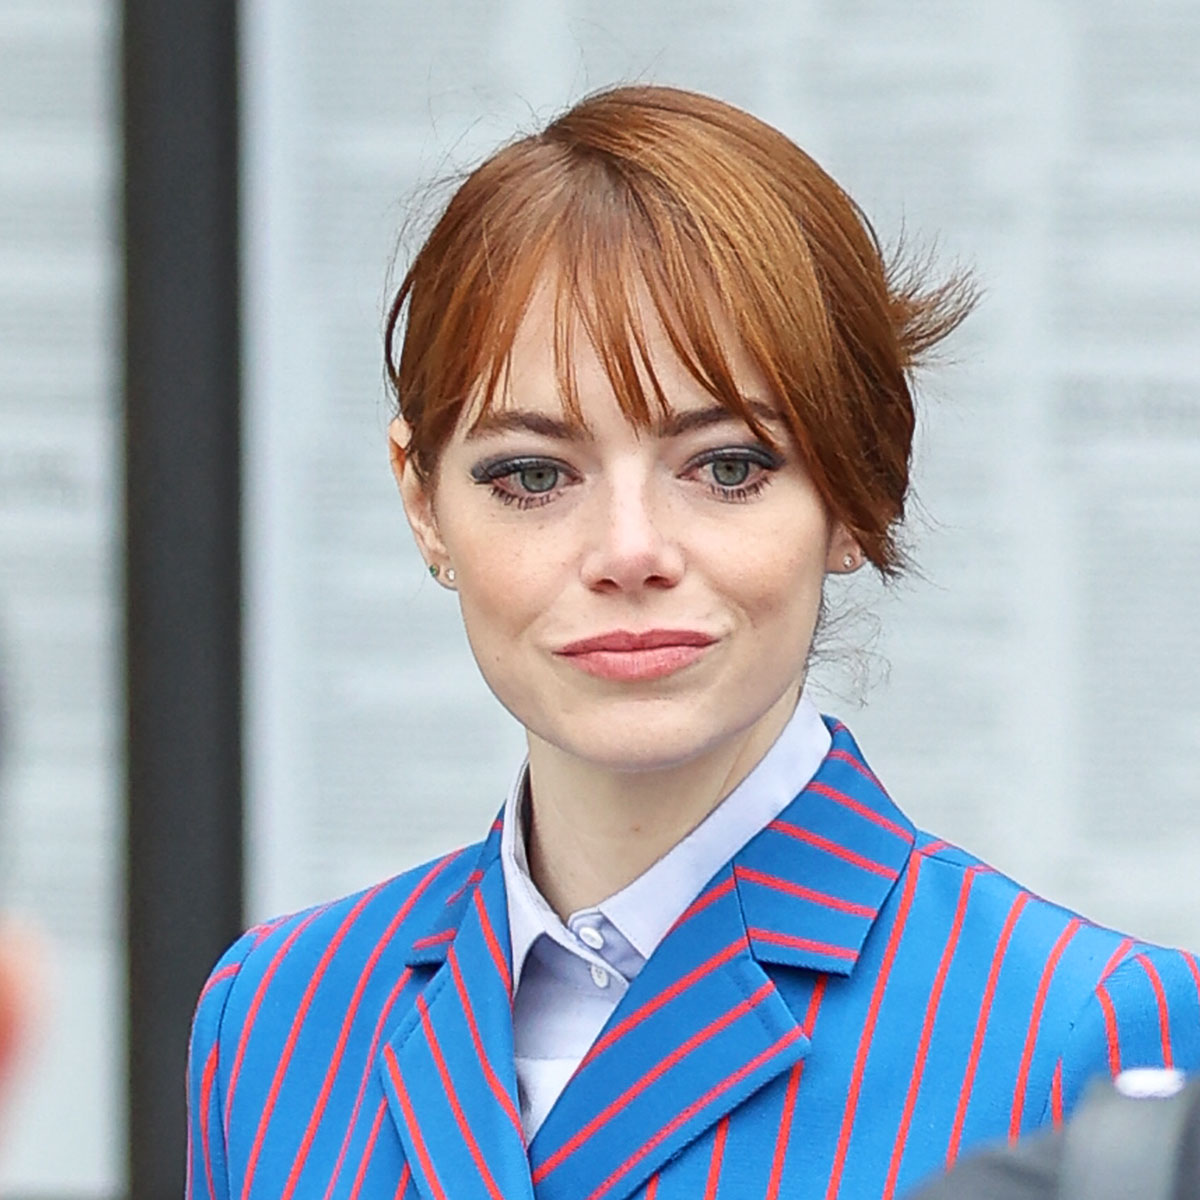 Emma Stone steps out in an 80s-inspired suit and Louis Vuitton